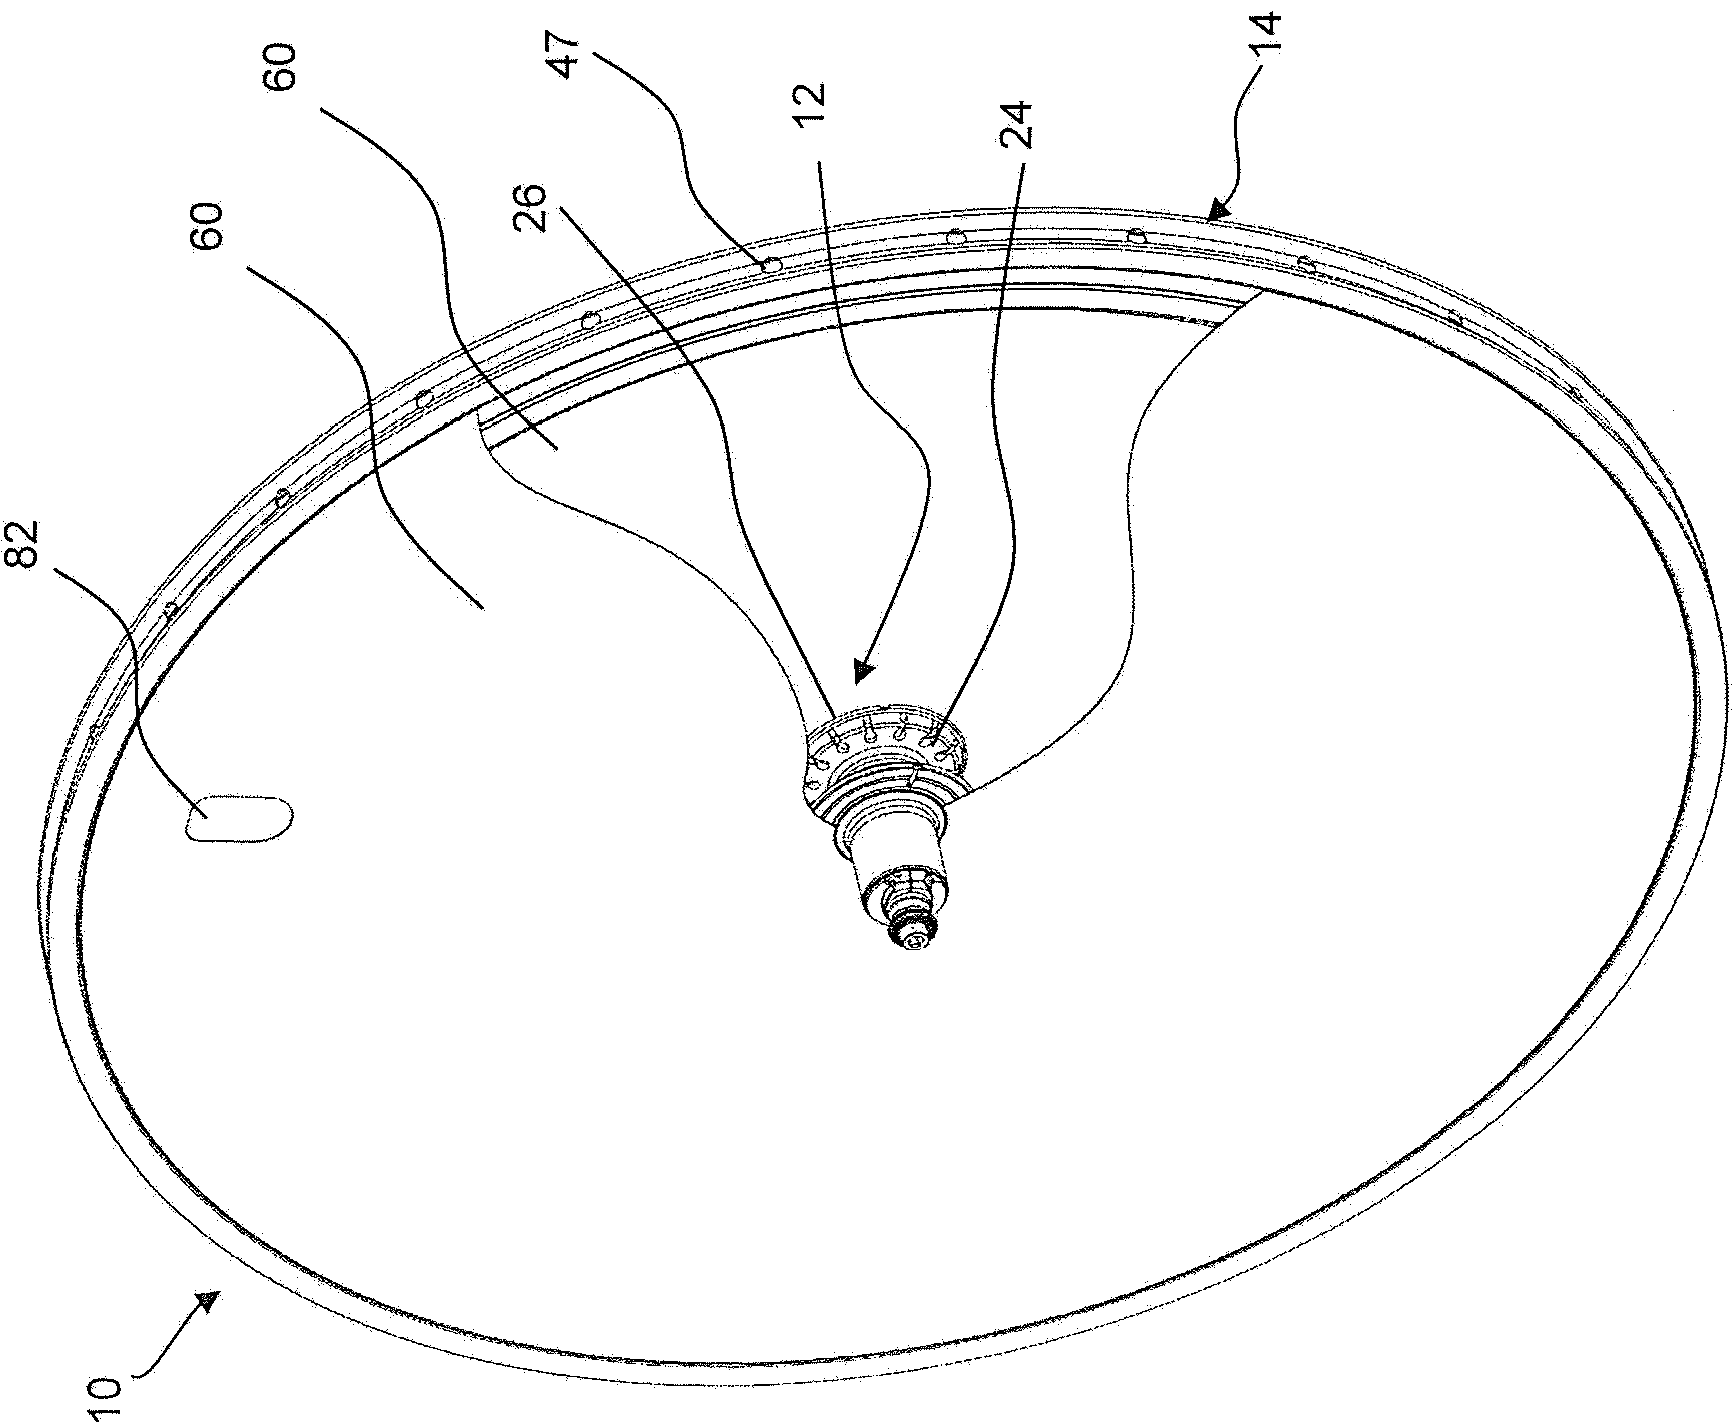 Bicycle wheel and relative manufacturing process